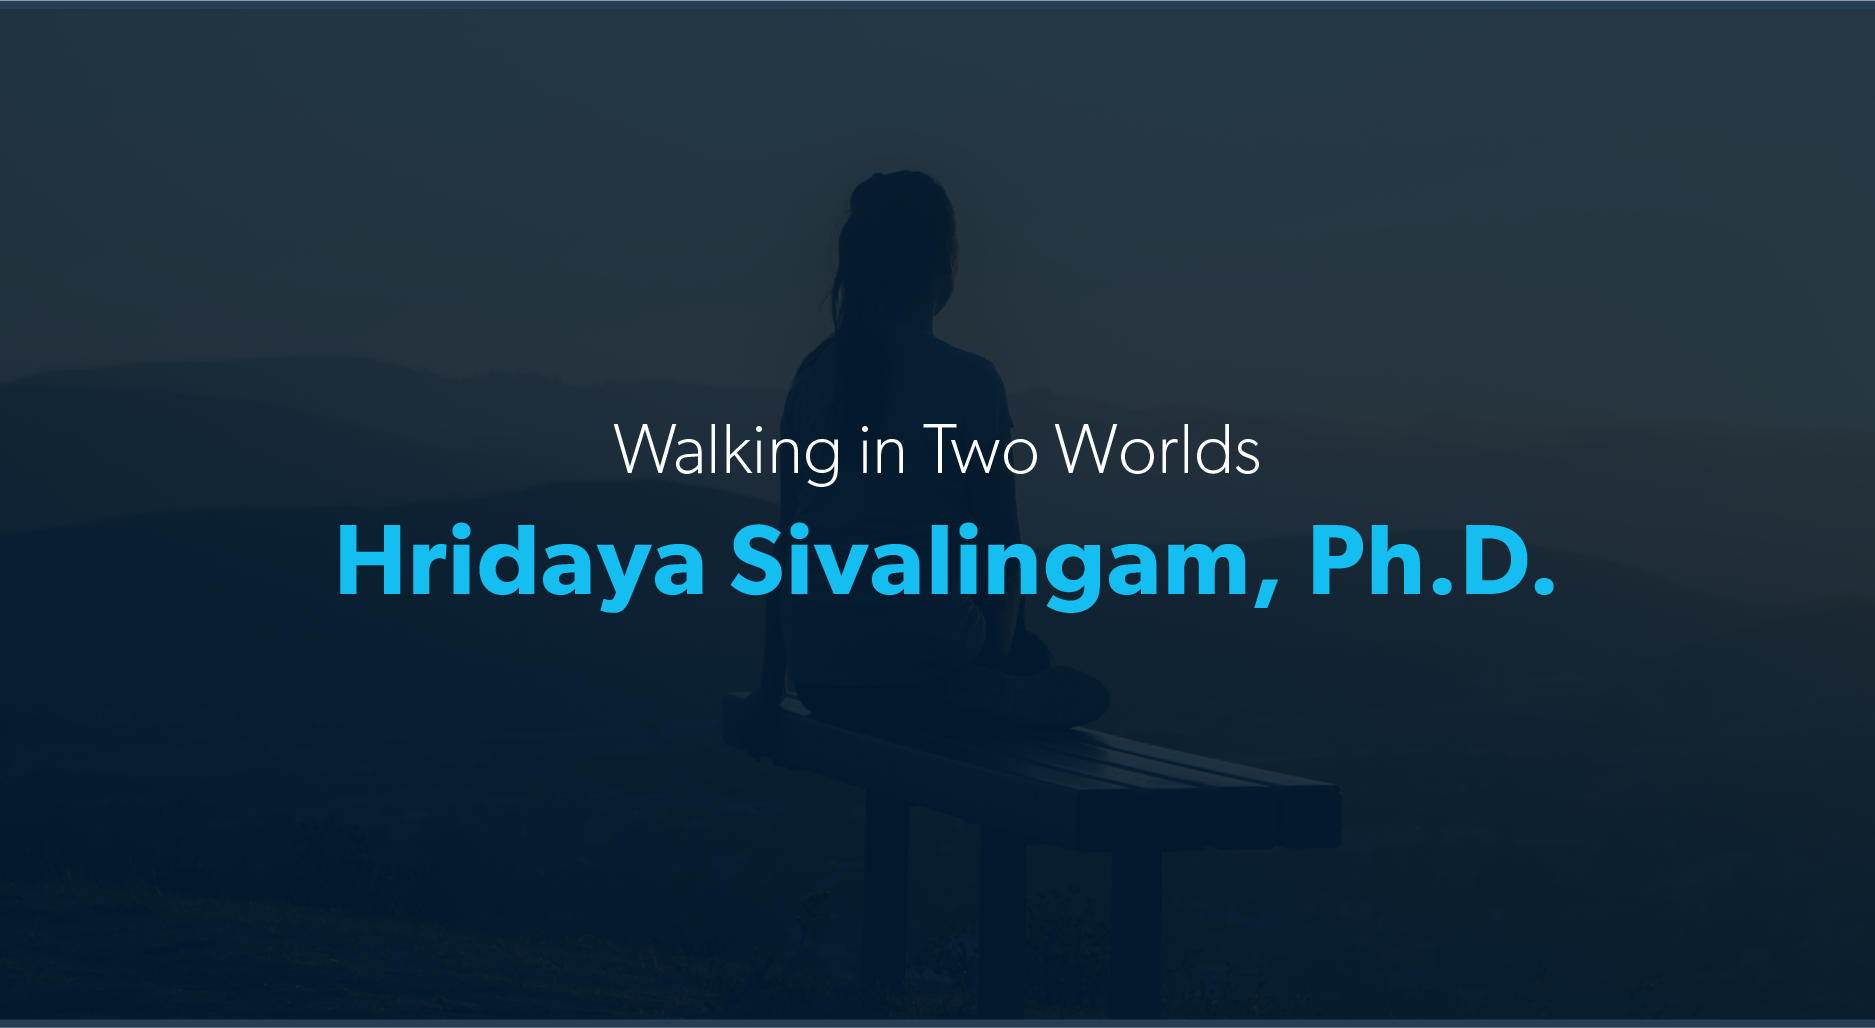 title header with text: "Walking in two worlds. Hridaya Sivalingam, Ph.D."